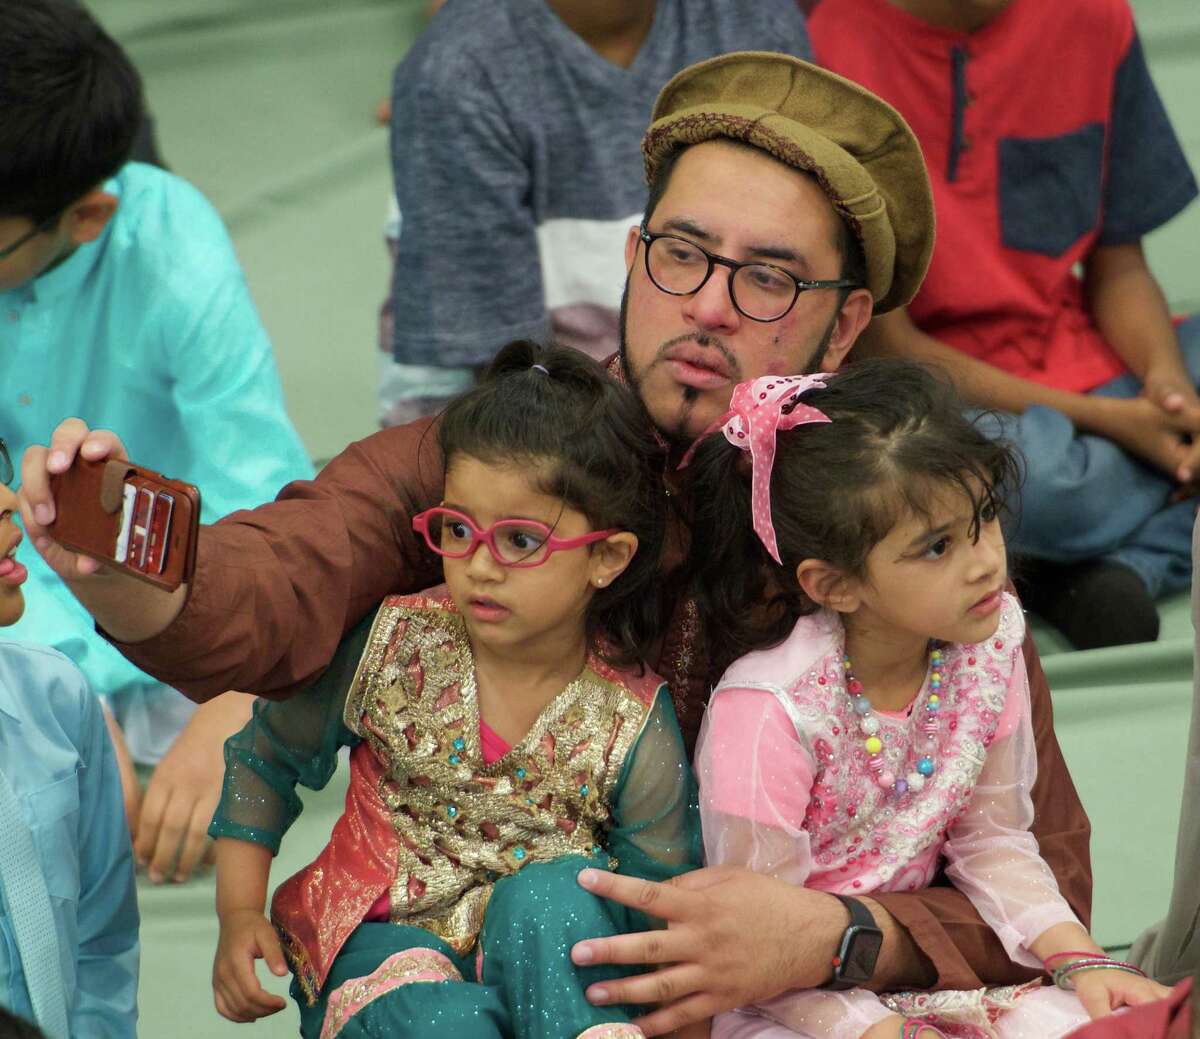 A young member of the congregation gets a selfie with a relative before the start of the Eid Al-Fitr ceremony at the Muslim Community Center Friday June 15, 2018 in Colonie, N.Y. (Skip Dickstein/Times Union)